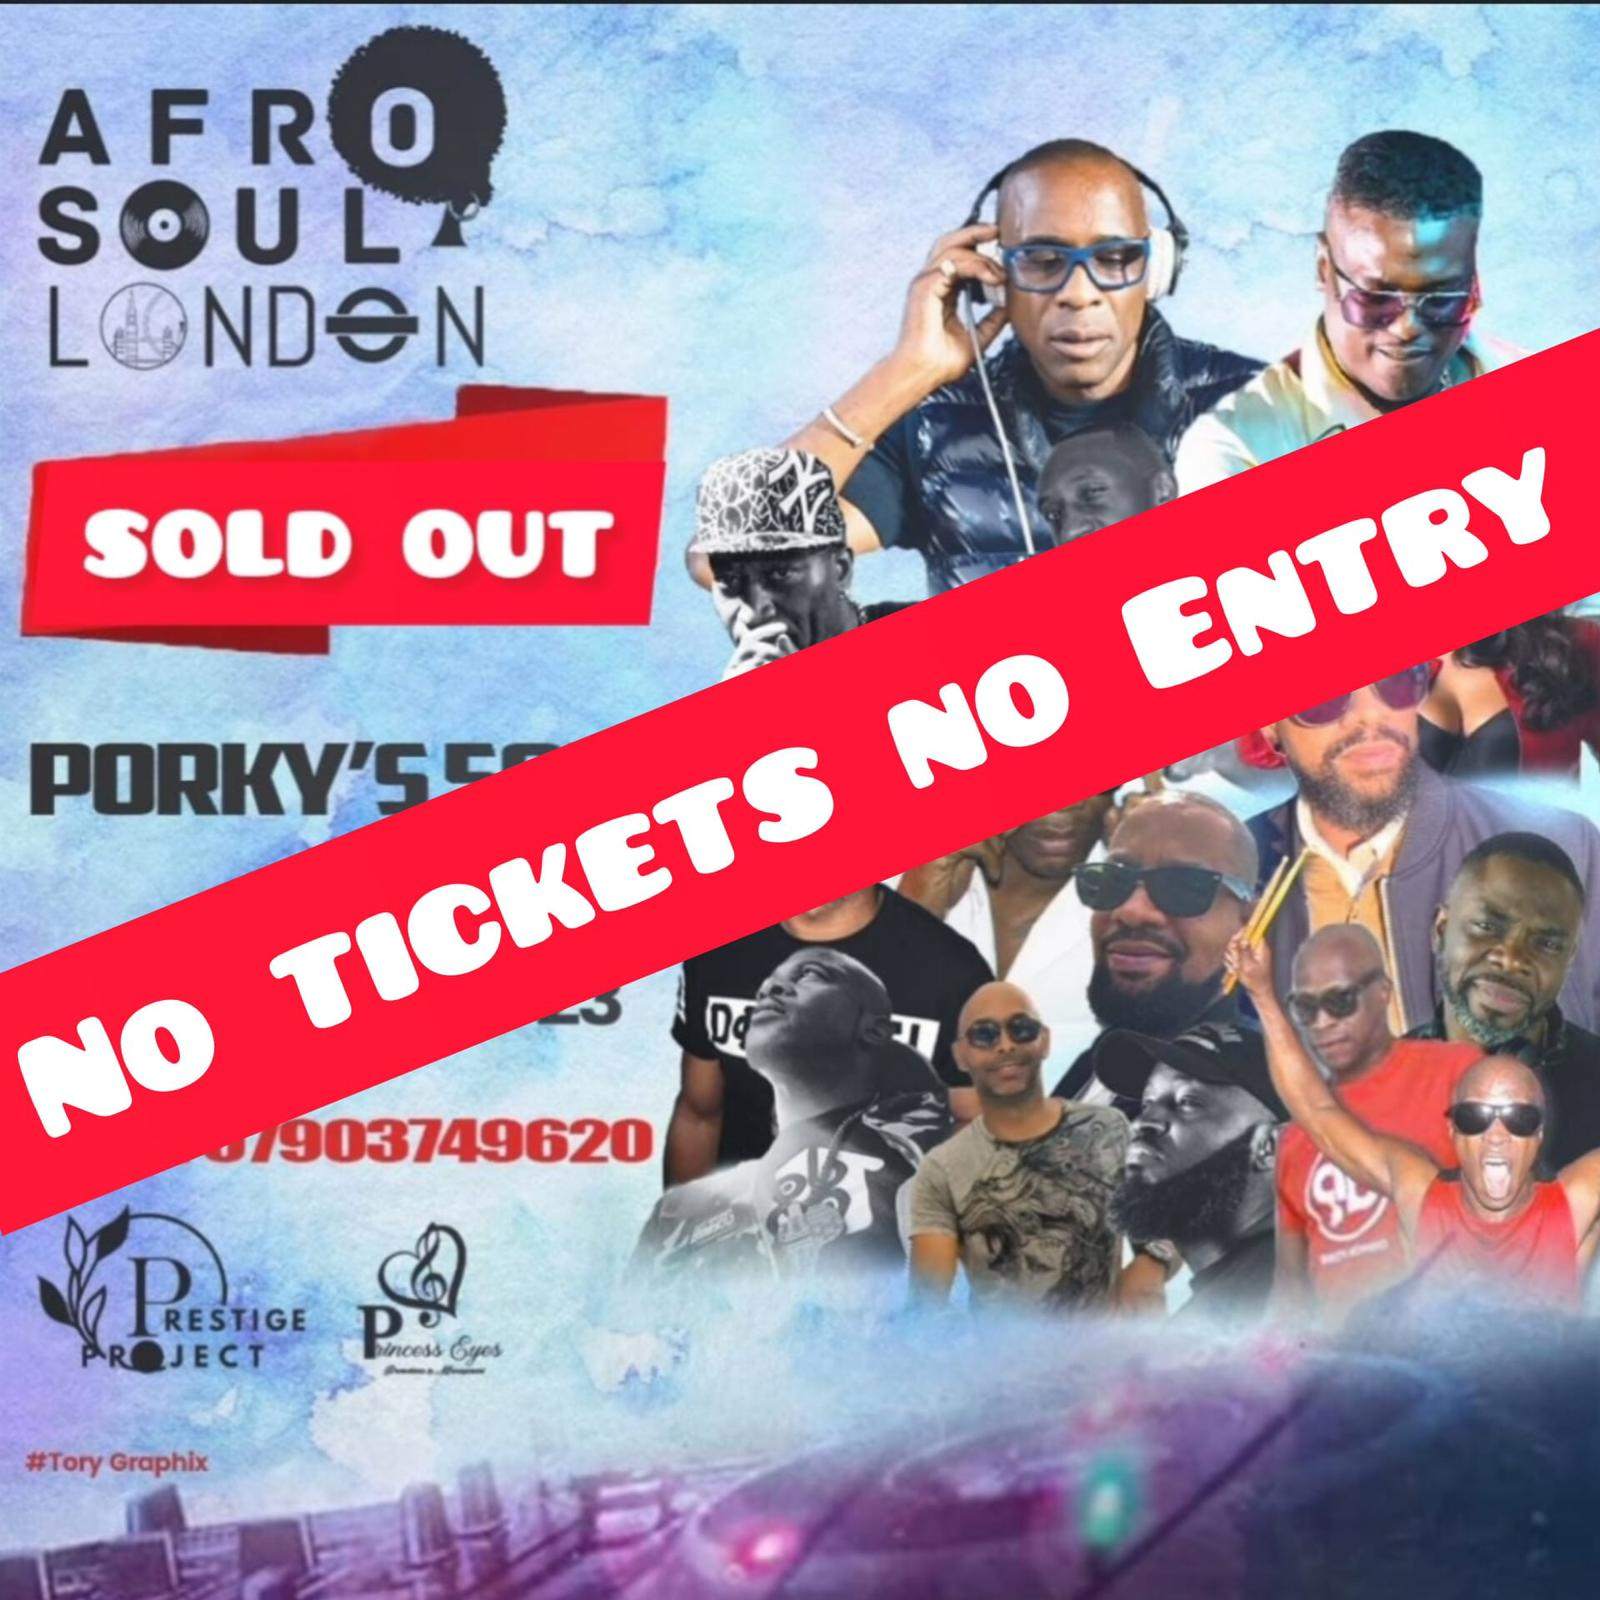 Afro Soul London HOST PORKY's B'DAY PARTY SOLD OUT NO TICKET NO ENTRY - Página frontal